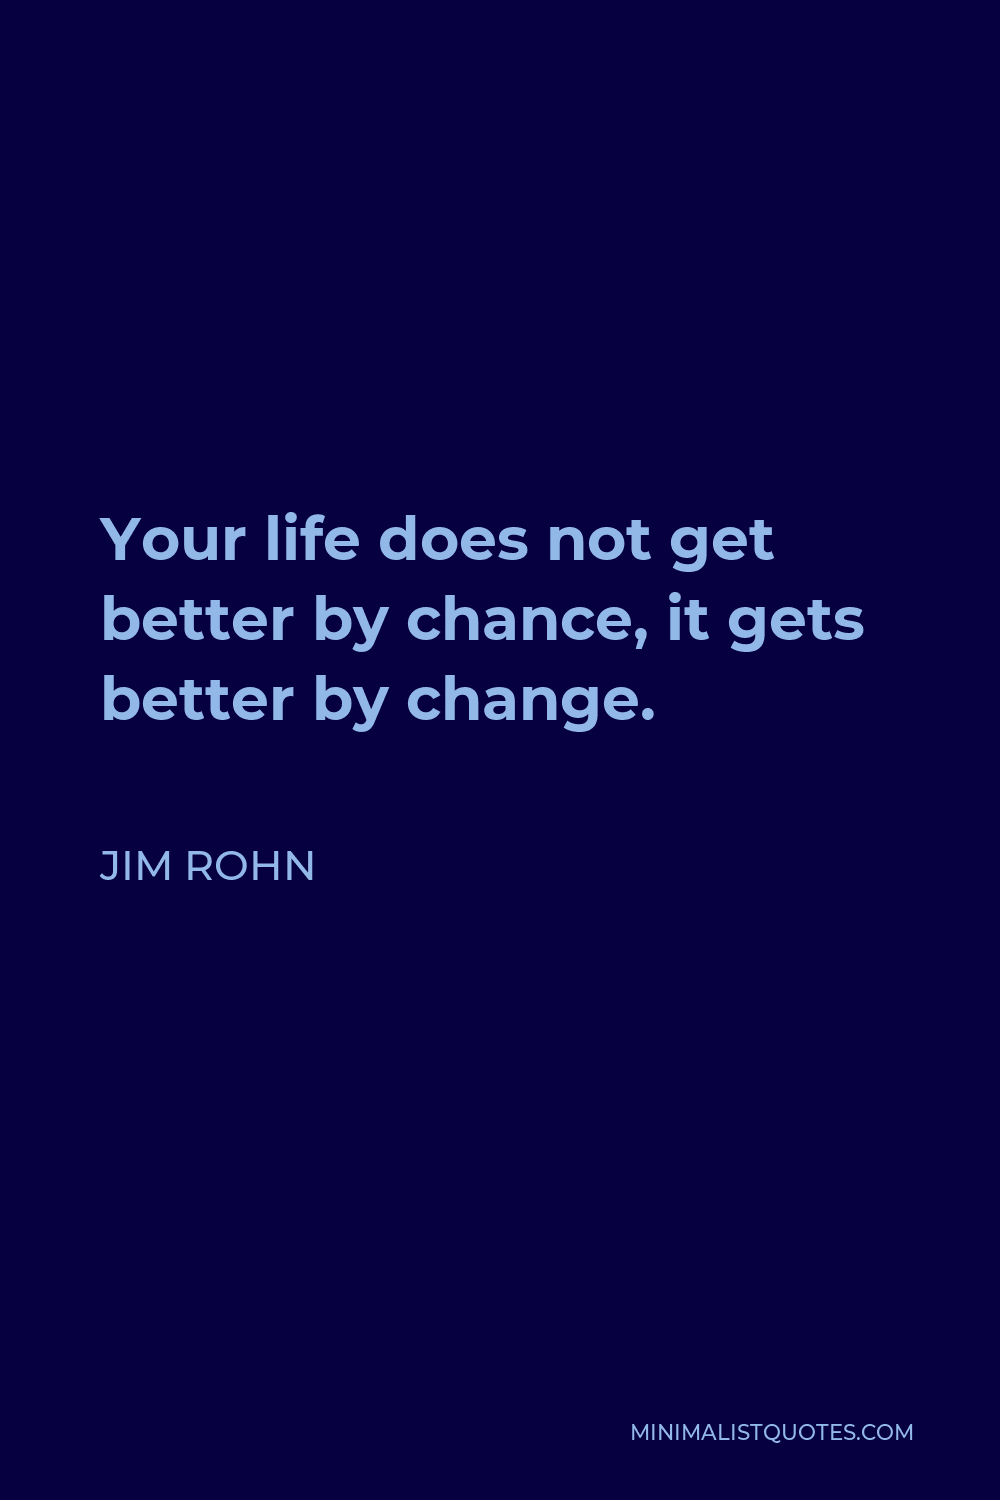 Jim Rohn Quote Your Life Does Not Get Better By Chance It Gets Better